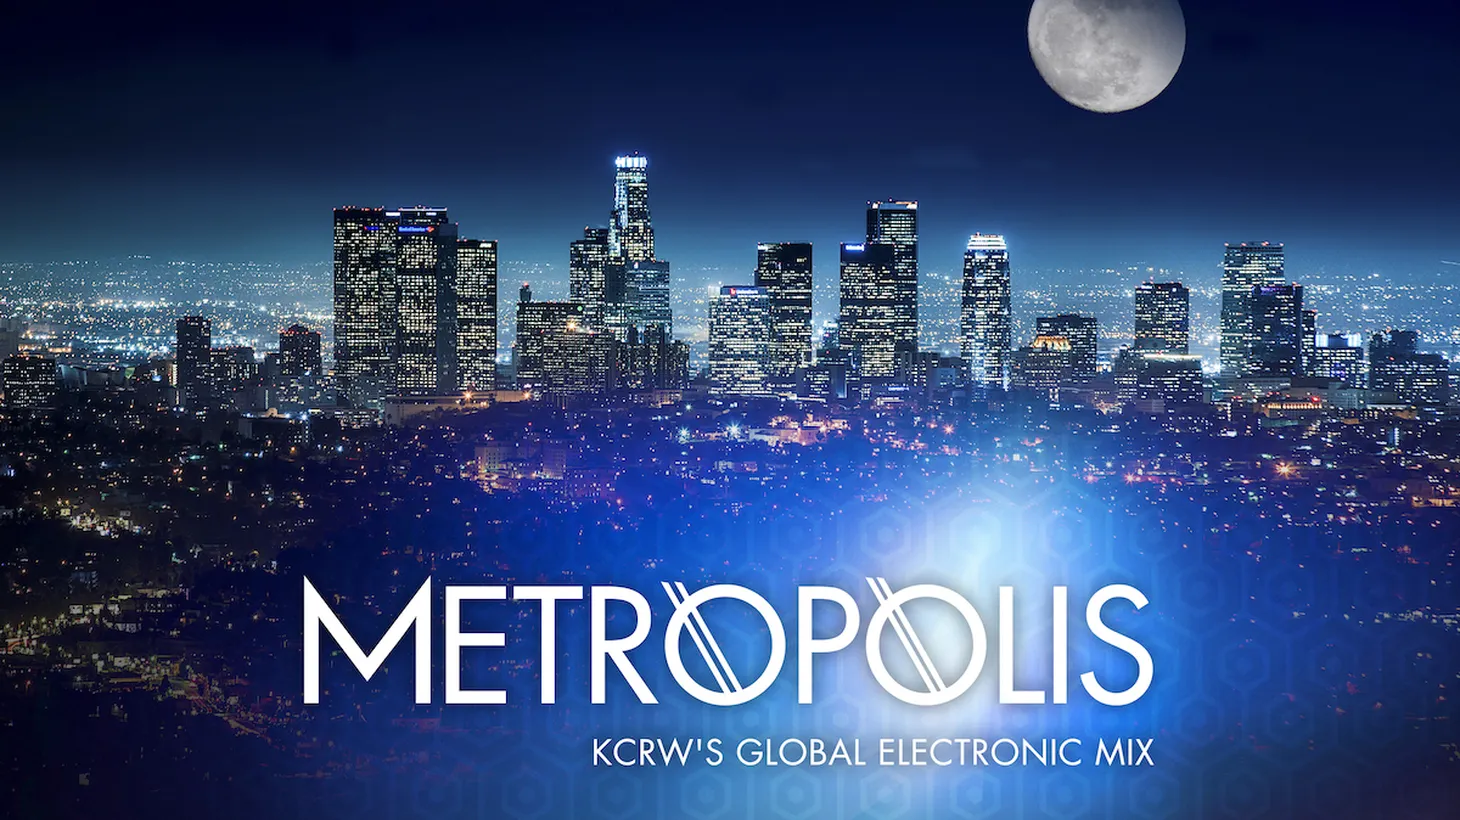 This week the Metropolis mix features a new Moon Boots remix, the latest from Disclosure, Willaris. K remixed by Boys Noize, Caravan Palace, Tokimonsta, Faithless, and more!